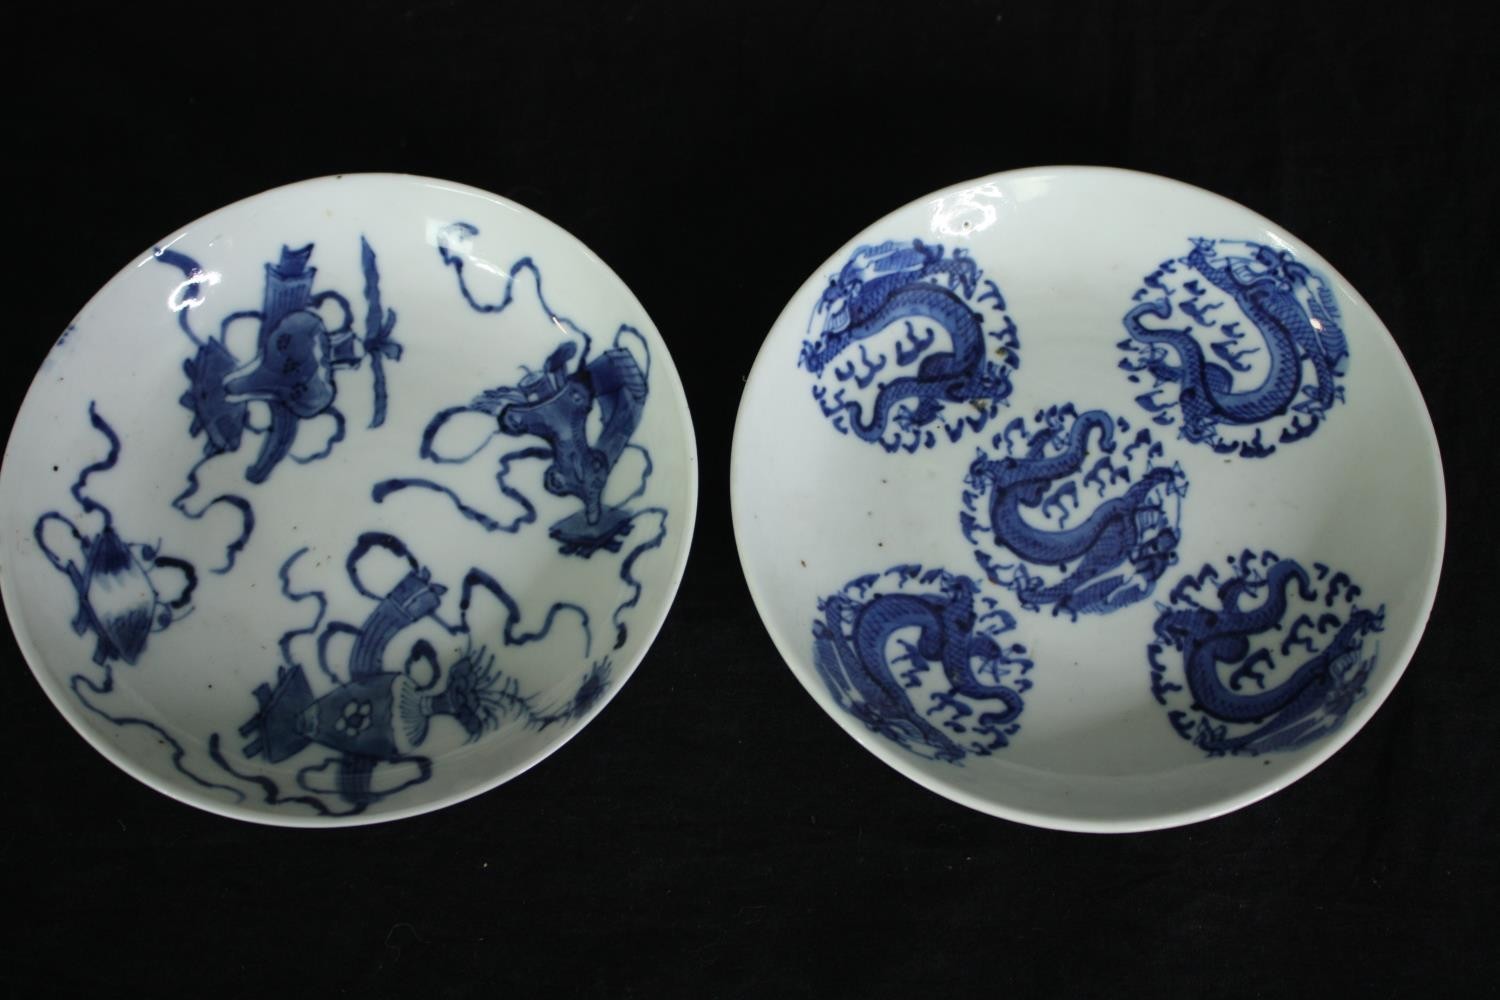 Two 19th century Chinese blue and white hand painted porcelain plates, one with five dragons in